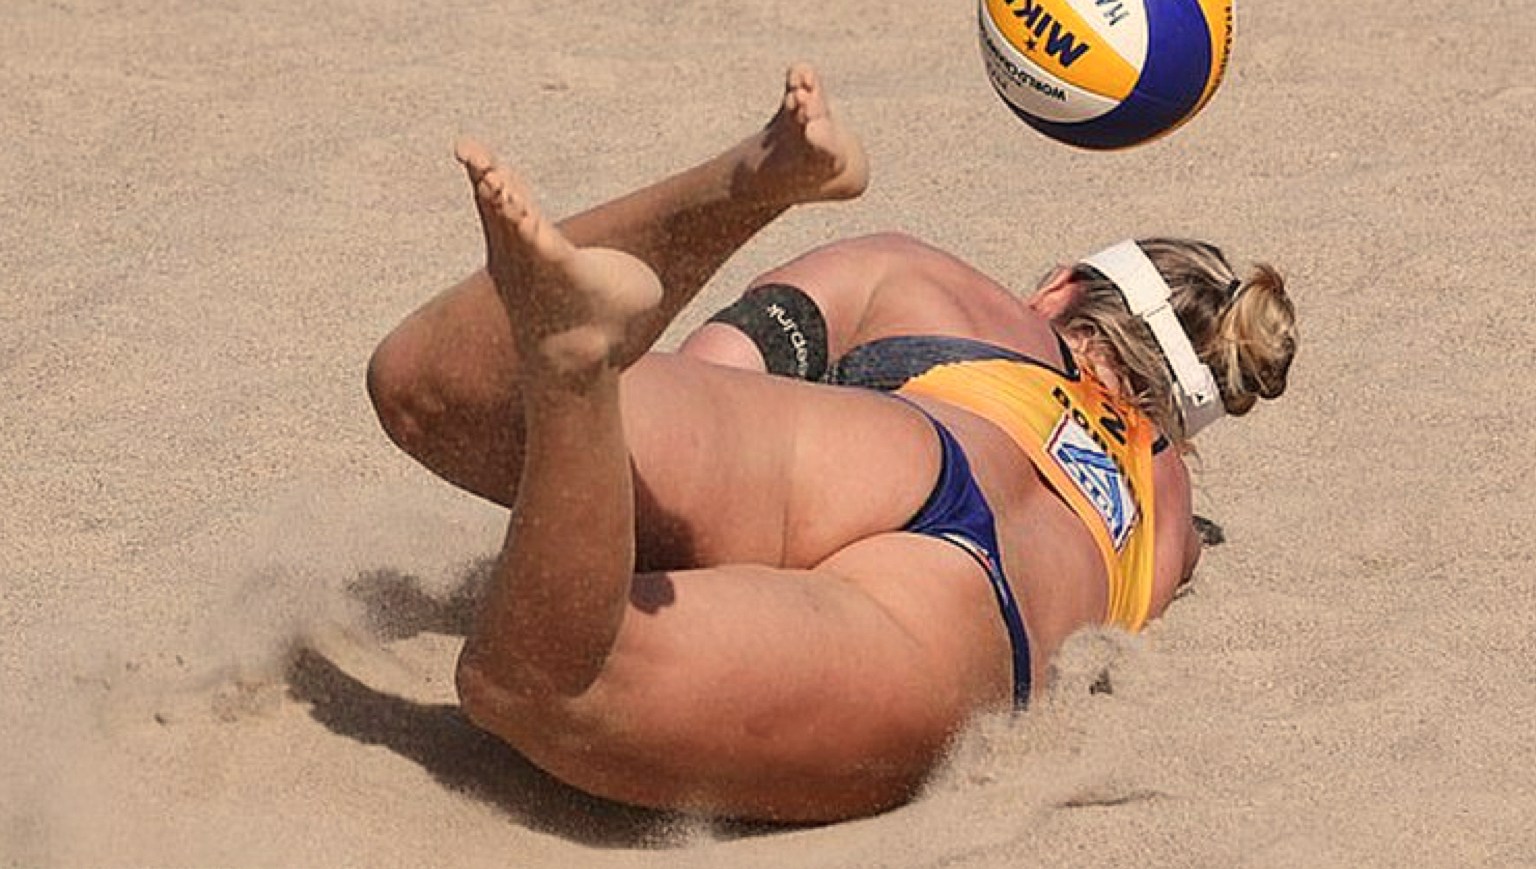 Naked Beach Volleyball - Fucked a Volley Ball Player on the Beach (64 photos) - motherless porn pics